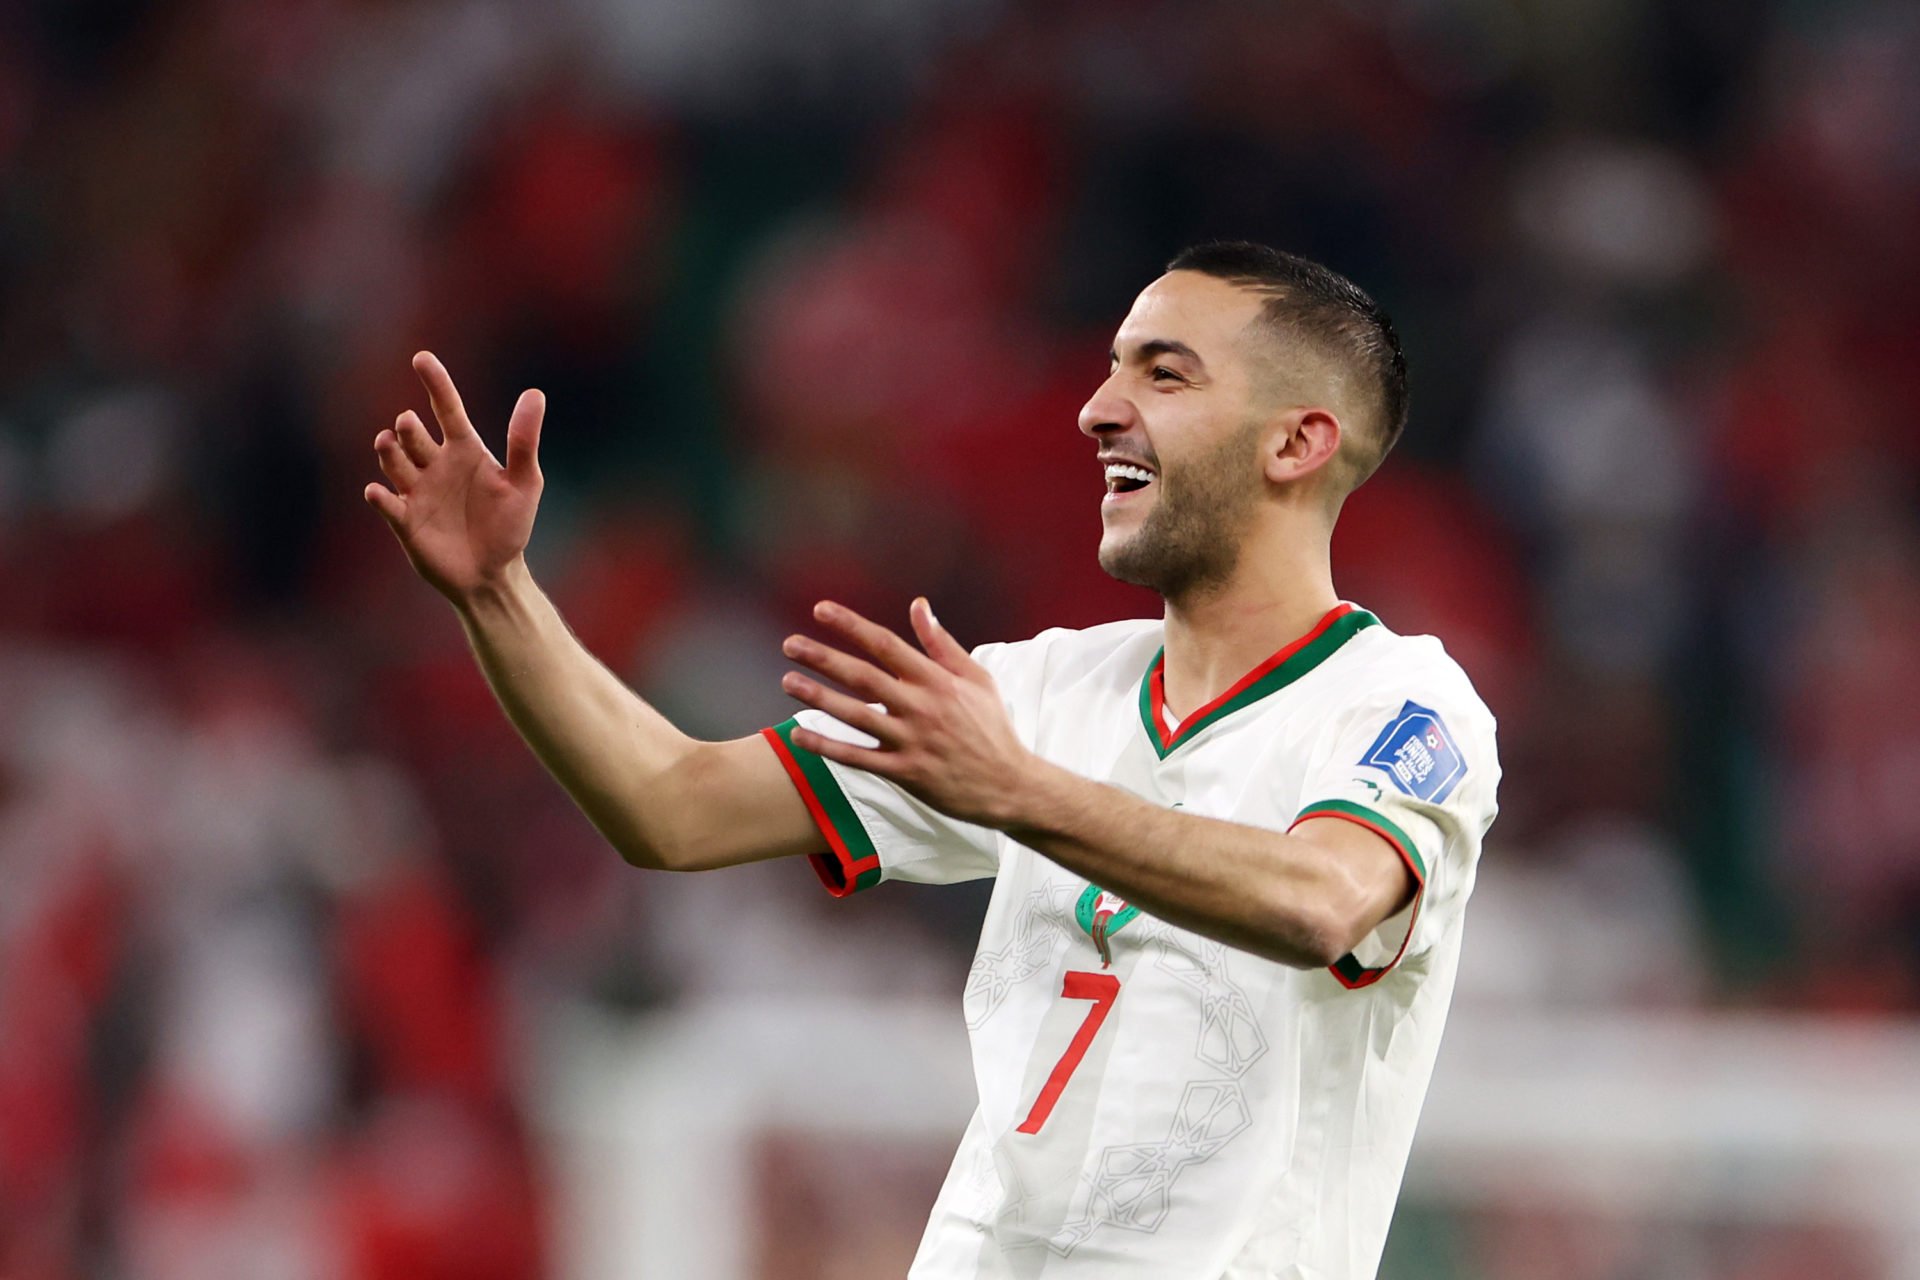 Tottenham target Hakim Ziyech 'distraught' after PSG move collapsed - journalist